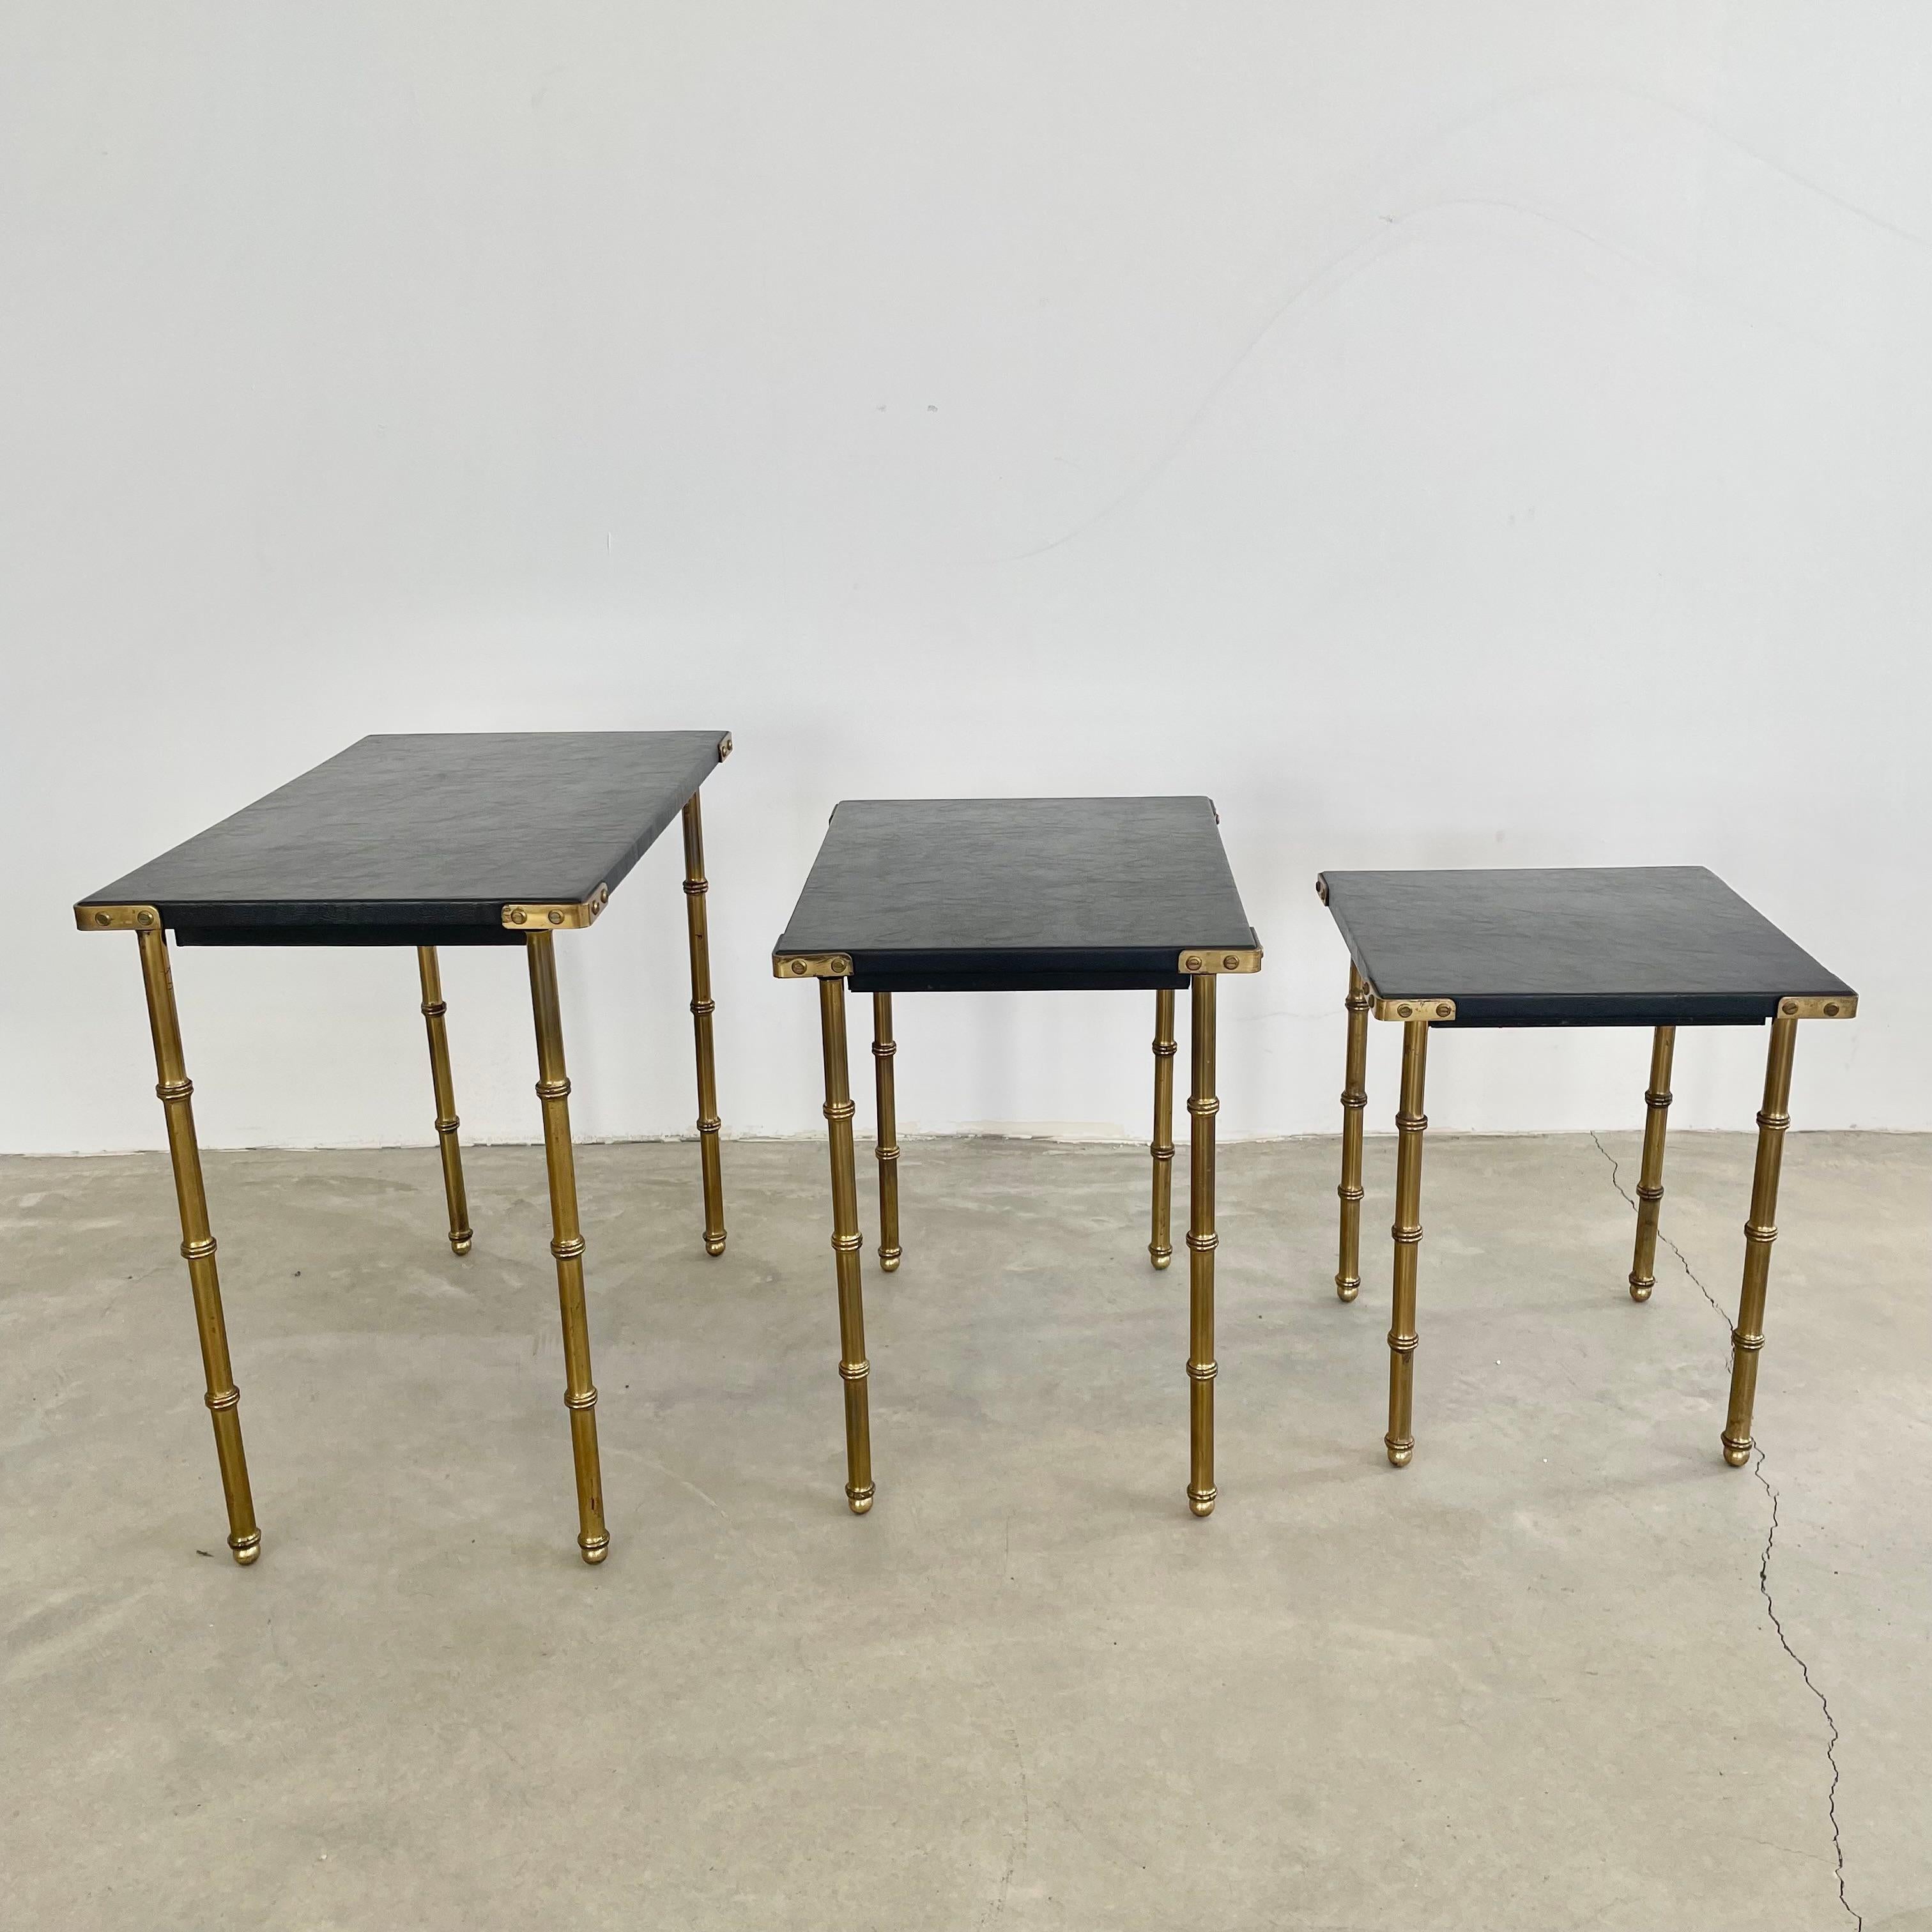 Set of 3 Jacques Adnet Nesting Tables, 1950s France For Sale 5